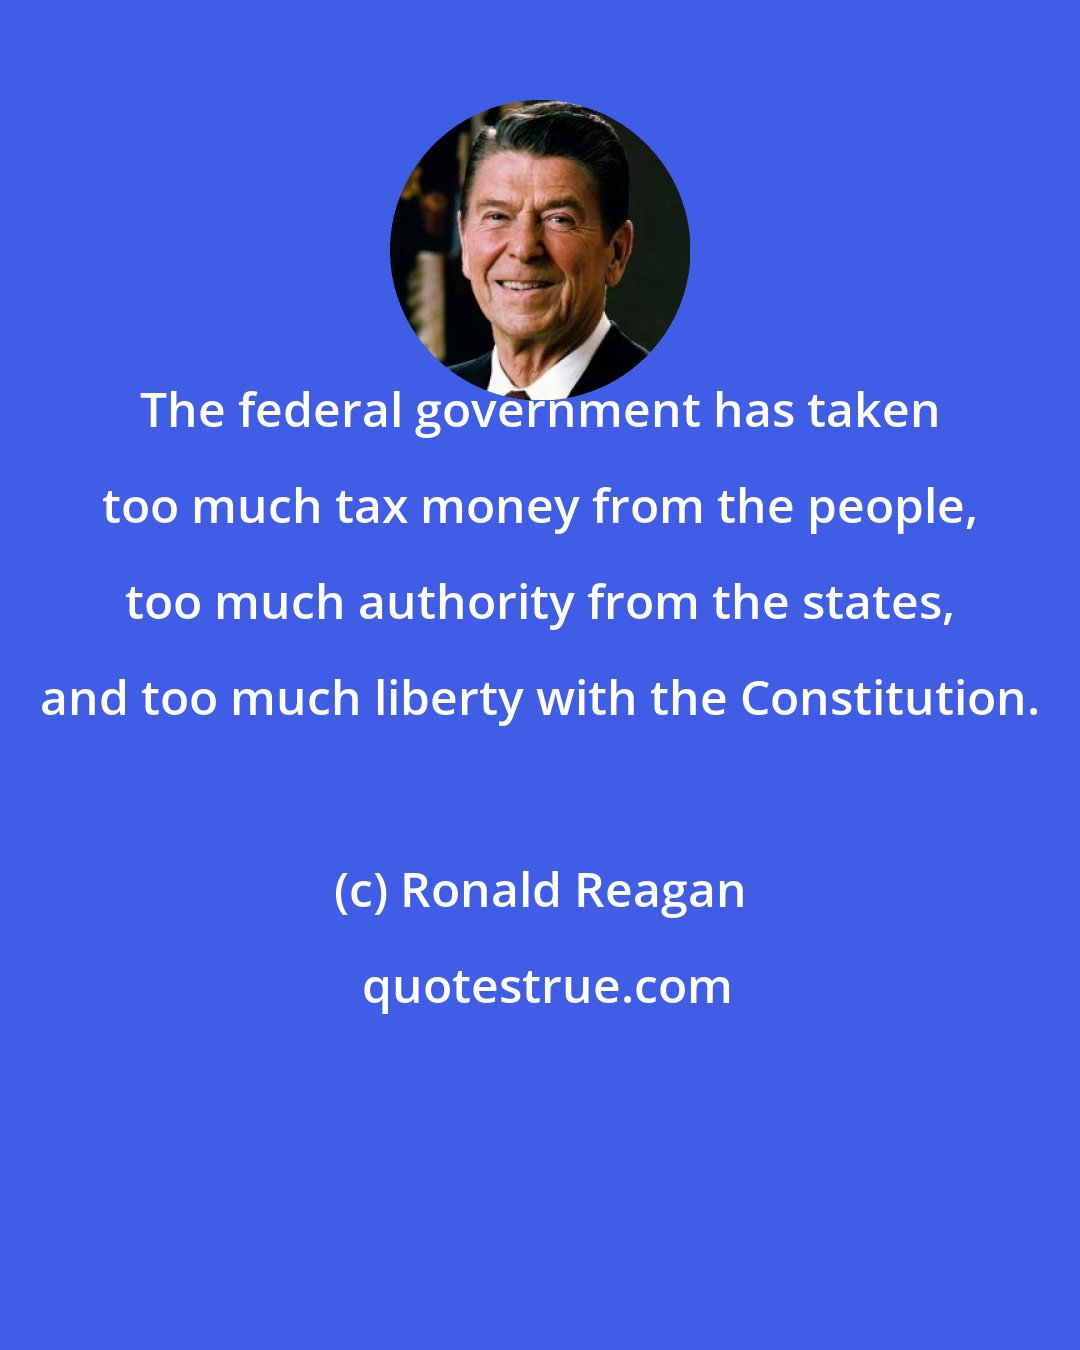 Ronald Reagan: The federal government has taken too much tax money from the people, too much authority from the states, and too much liberty with the Constitution.